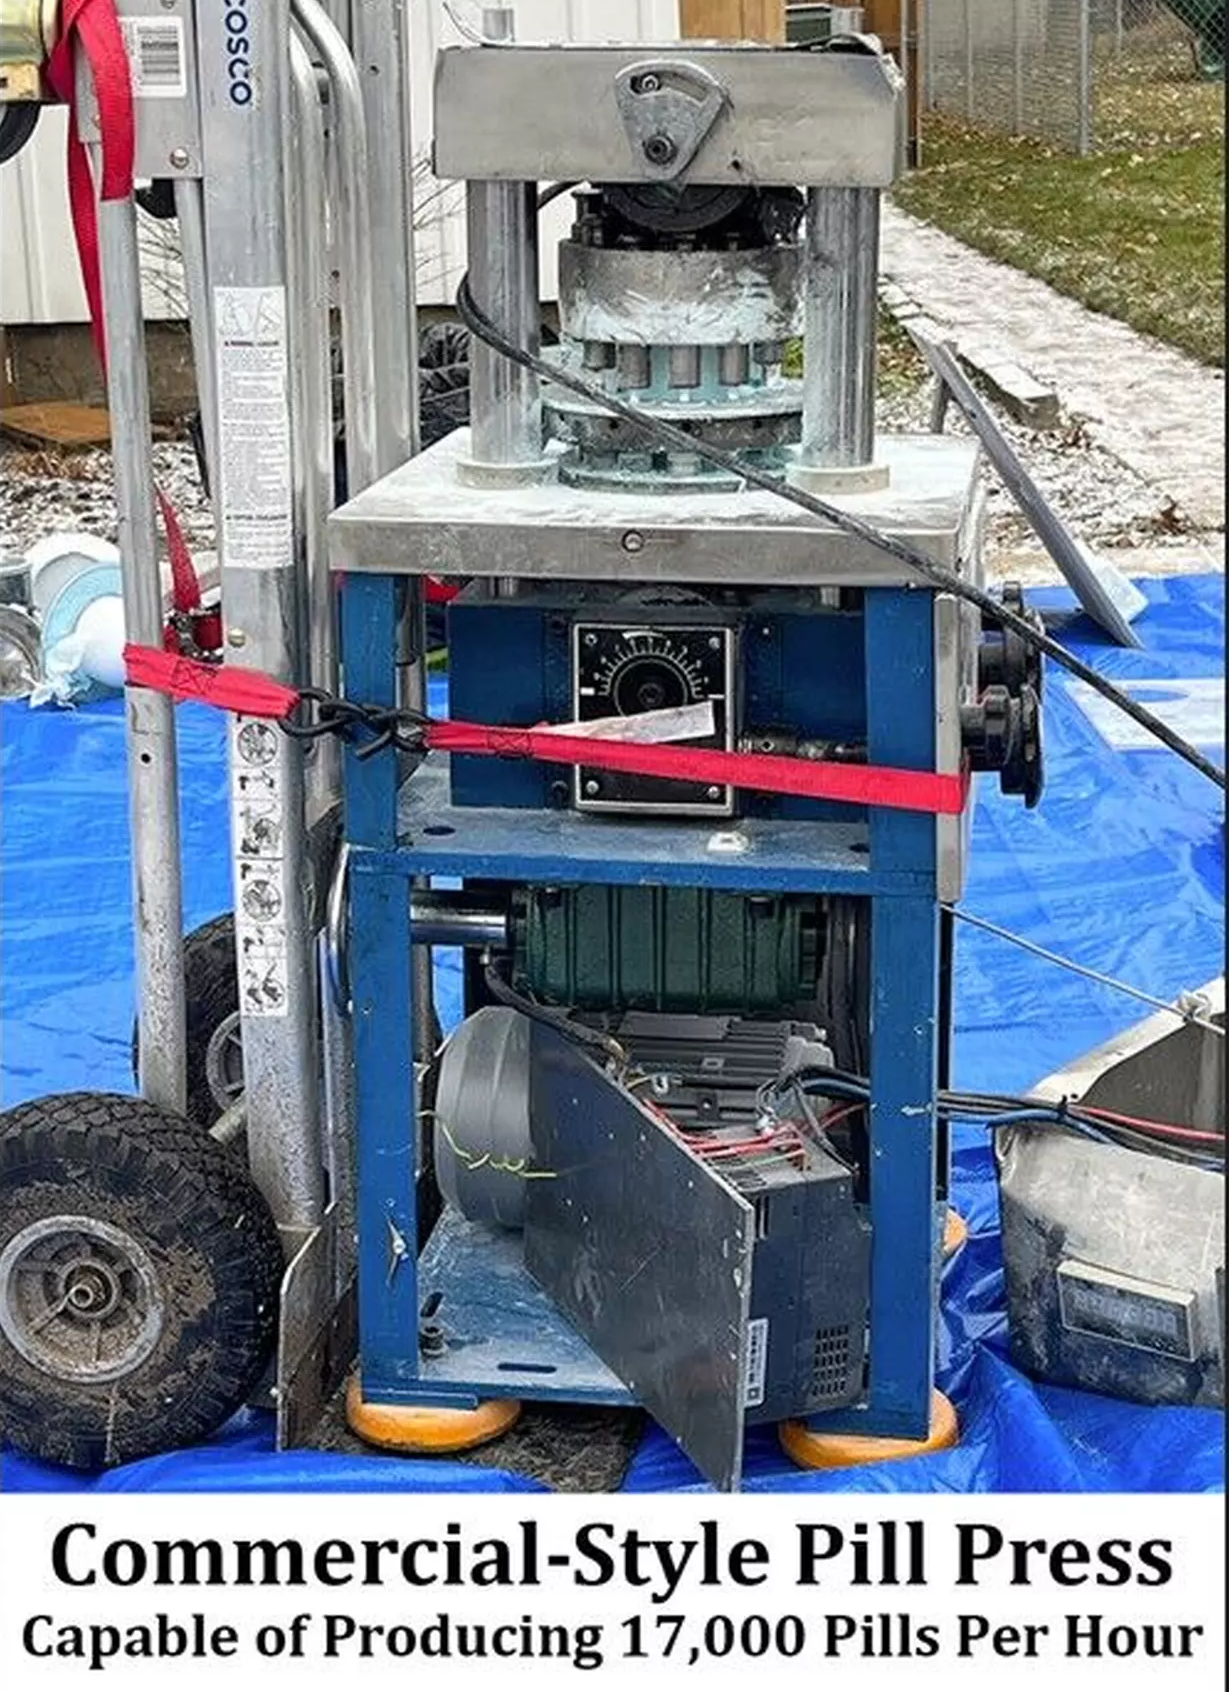 Picture of a large pill press on a blue tarp. A caption reads "A commercial pill press capable of churning out 17,000 fentanyl pills an hour."